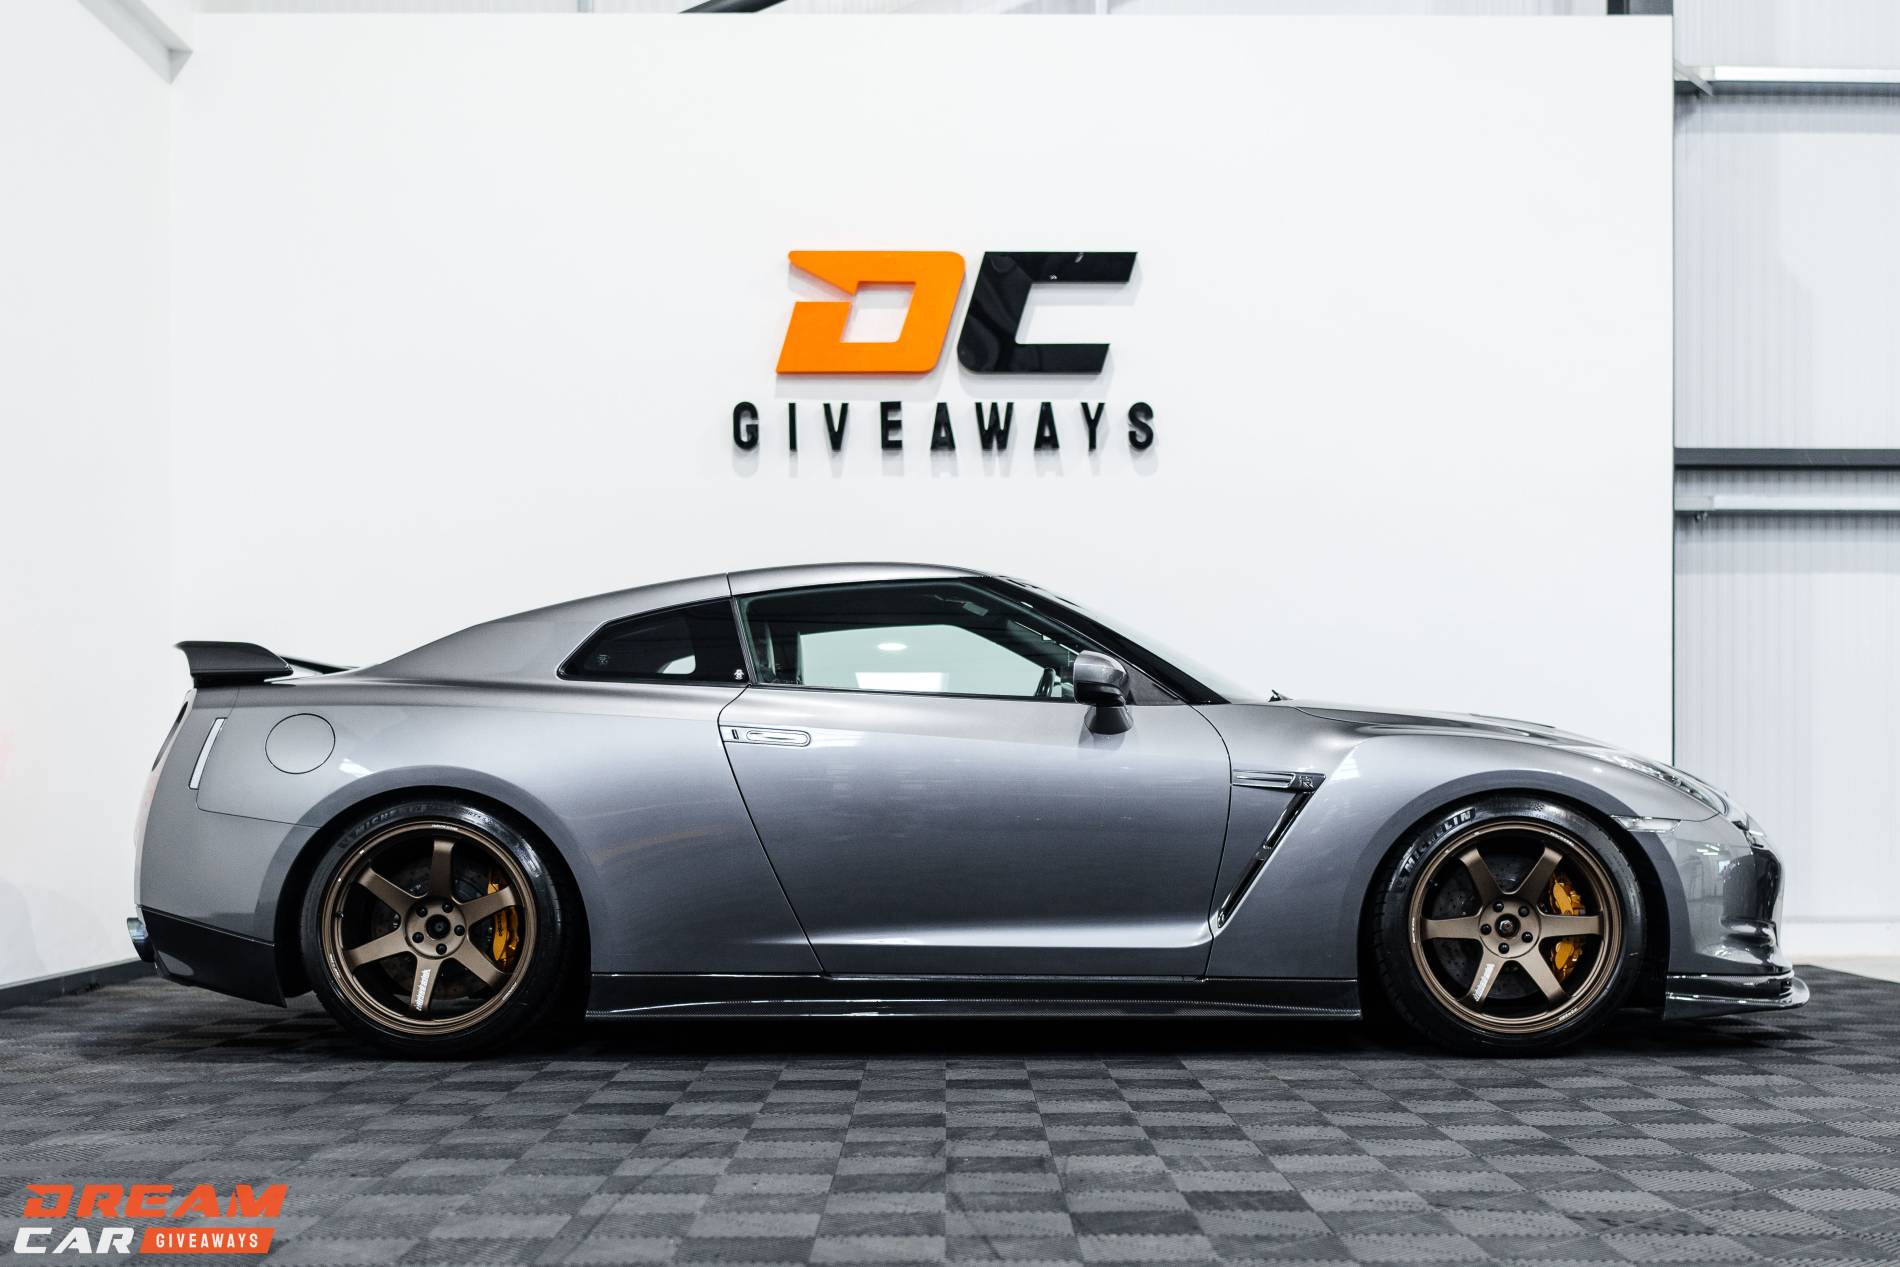 Win this Nissan R35 GTR & £1,000 or £37,000 Tax Free